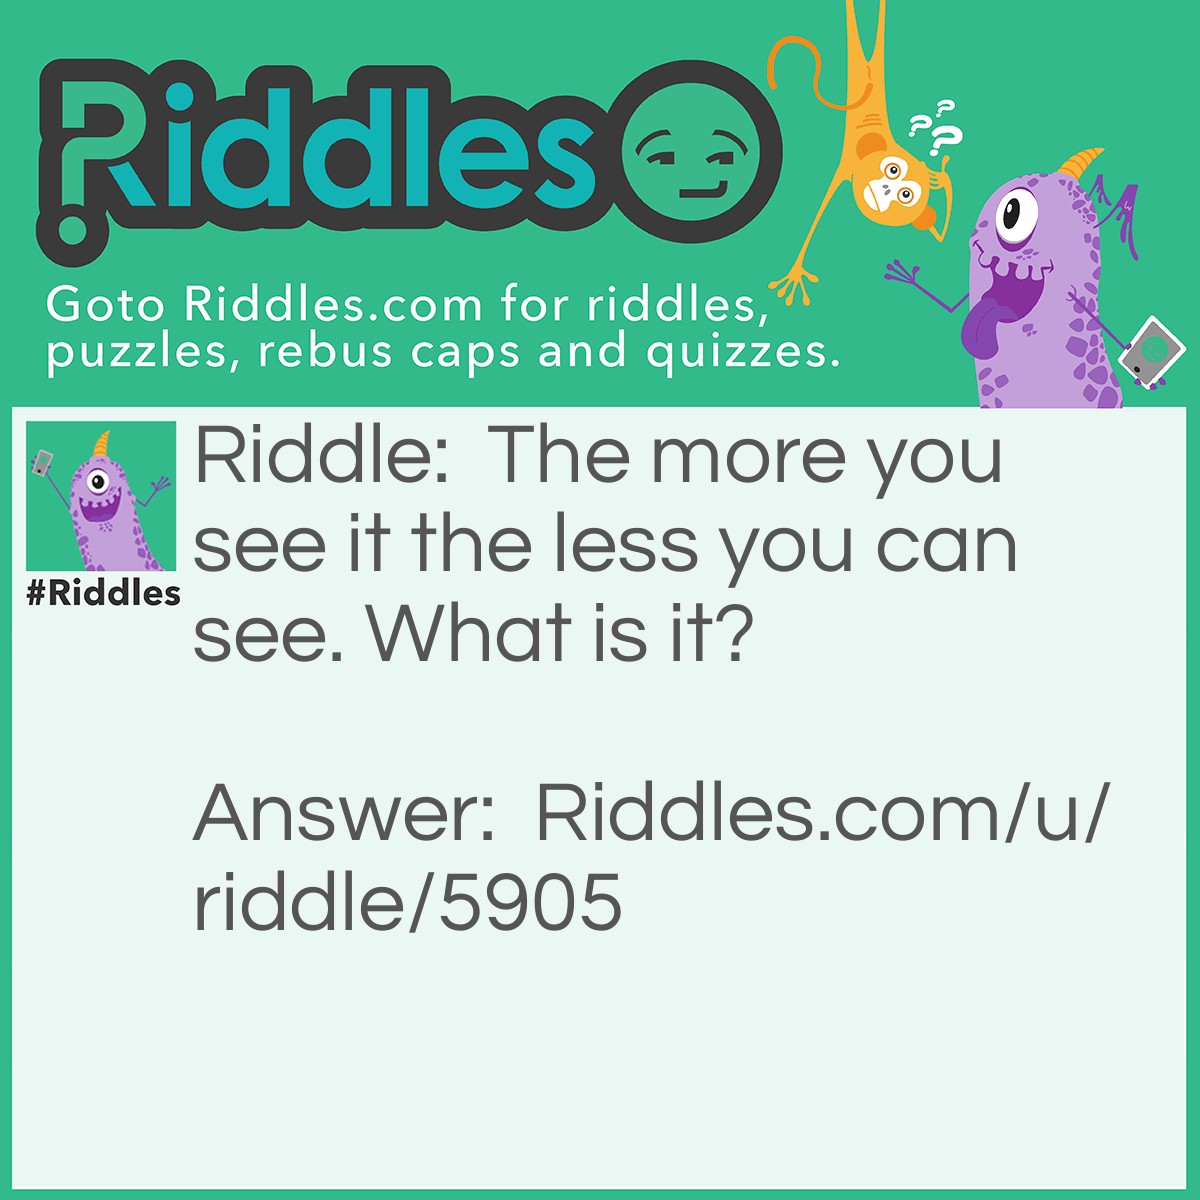 Riddle: The more you see it the less you can see. What is it? Answer: Darkness.